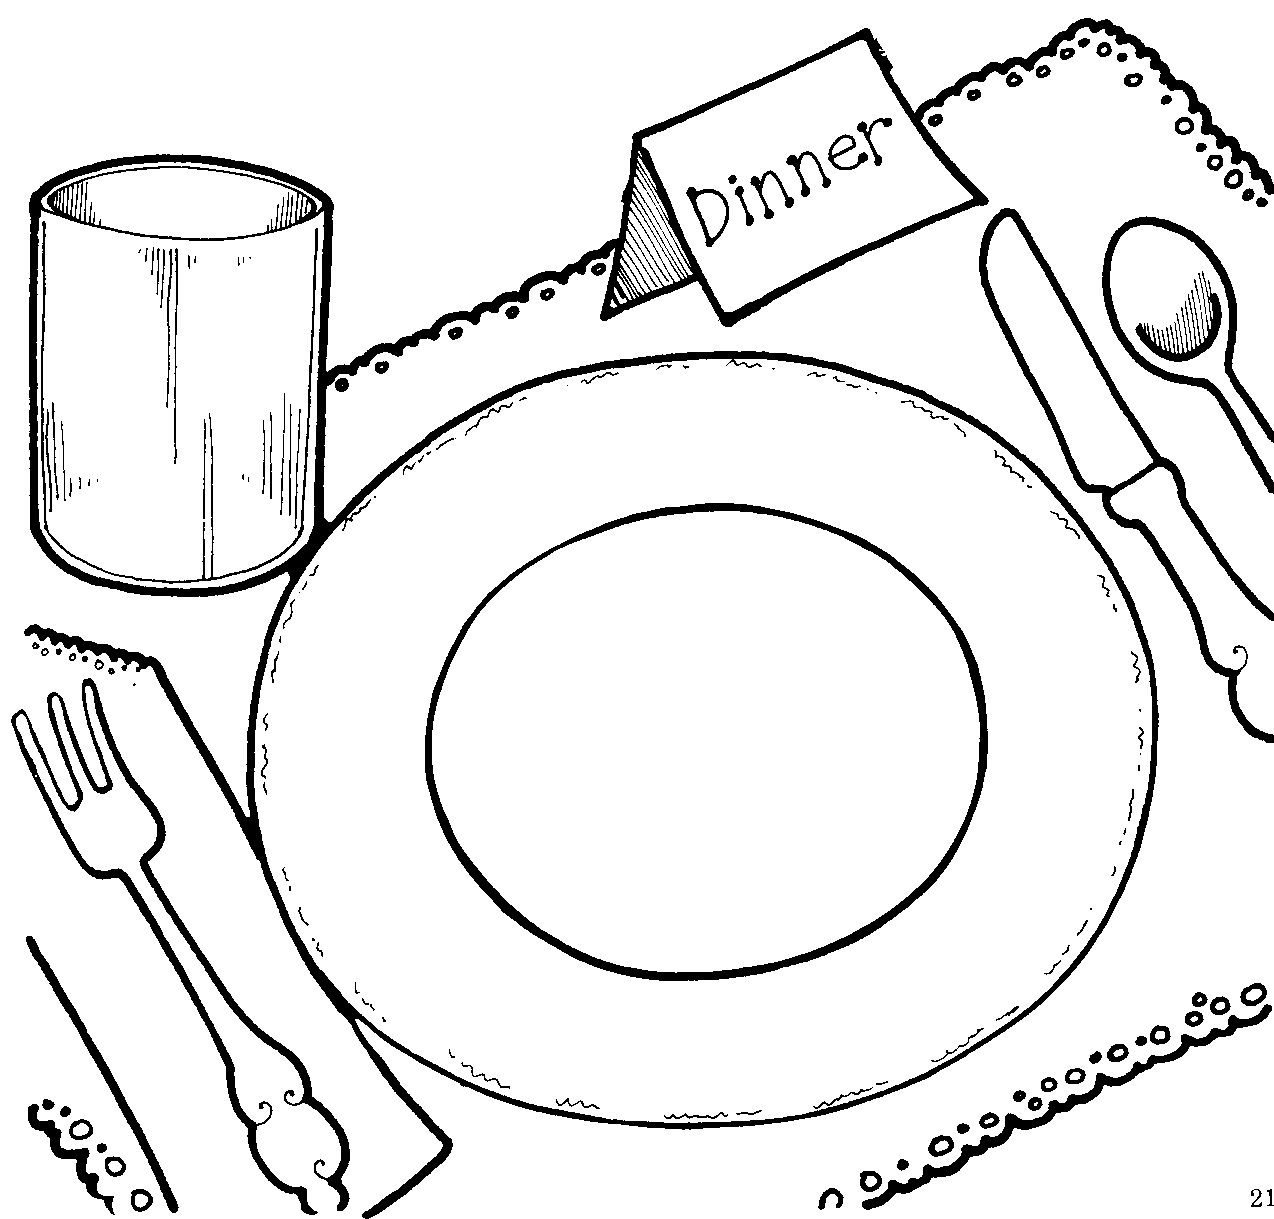 Dinner plate clipart black and white